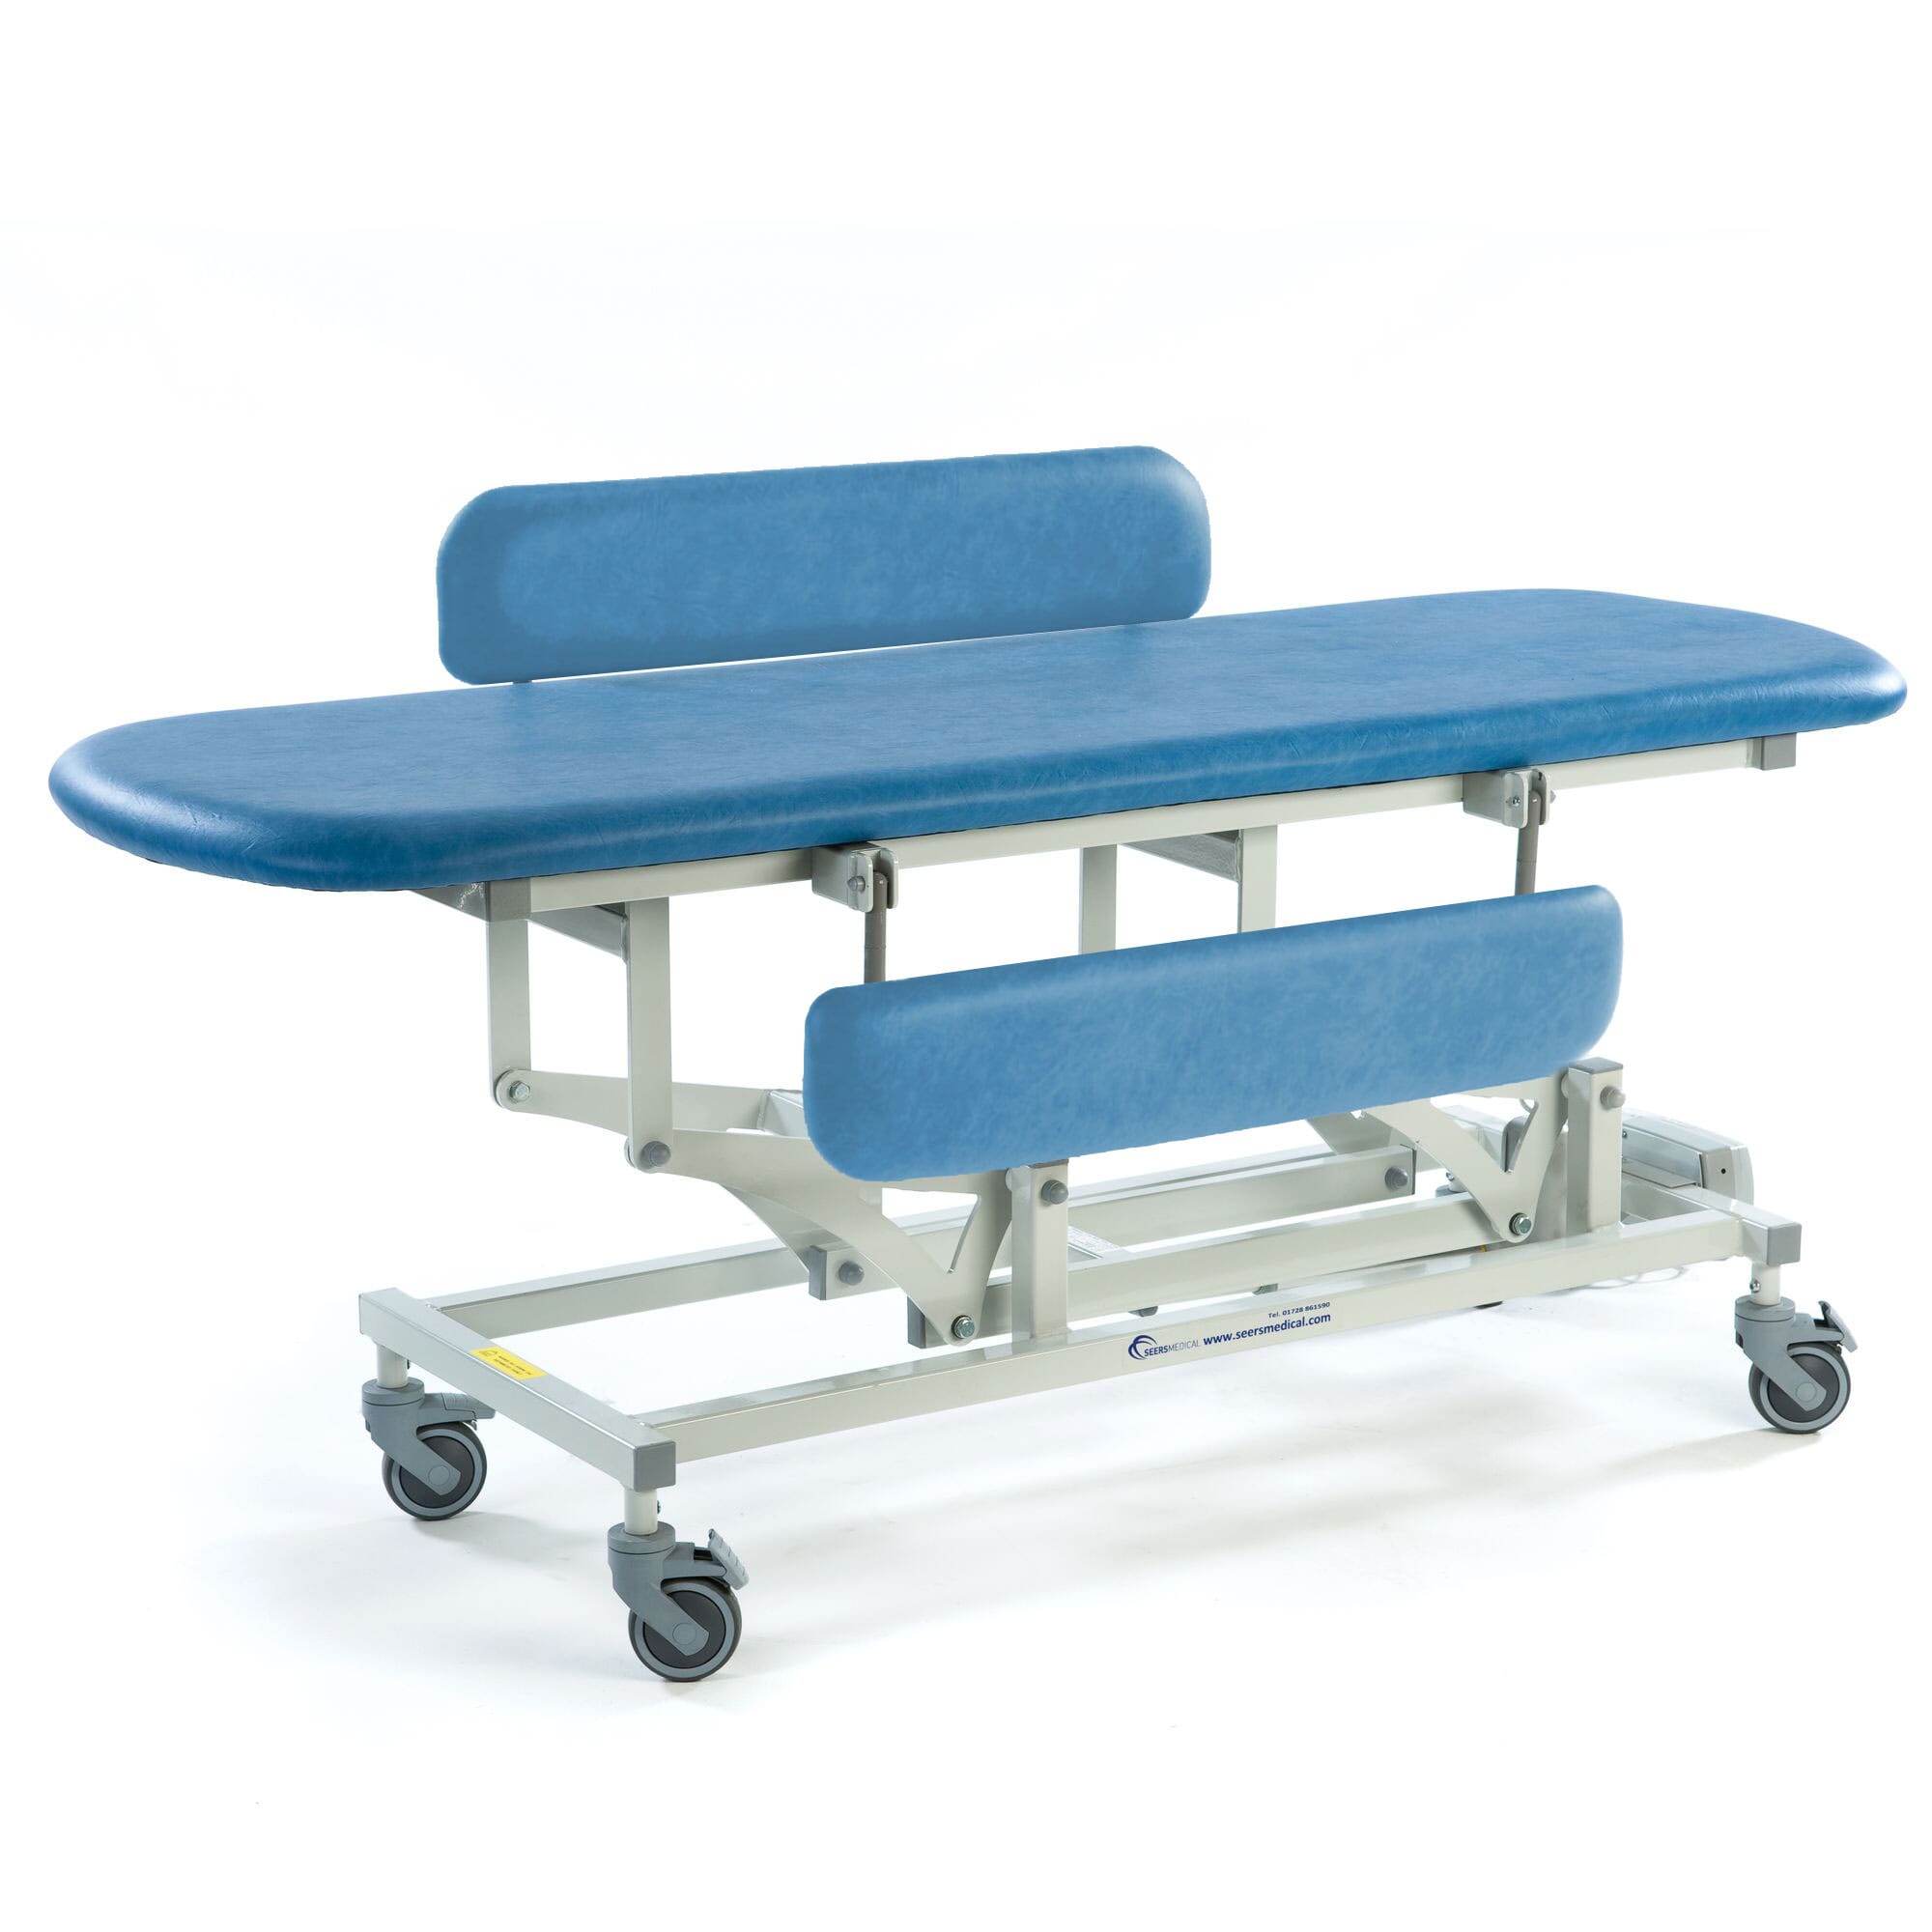 View Electric Sterling Changing Table Sky Blue Padded Sides 1840mm information